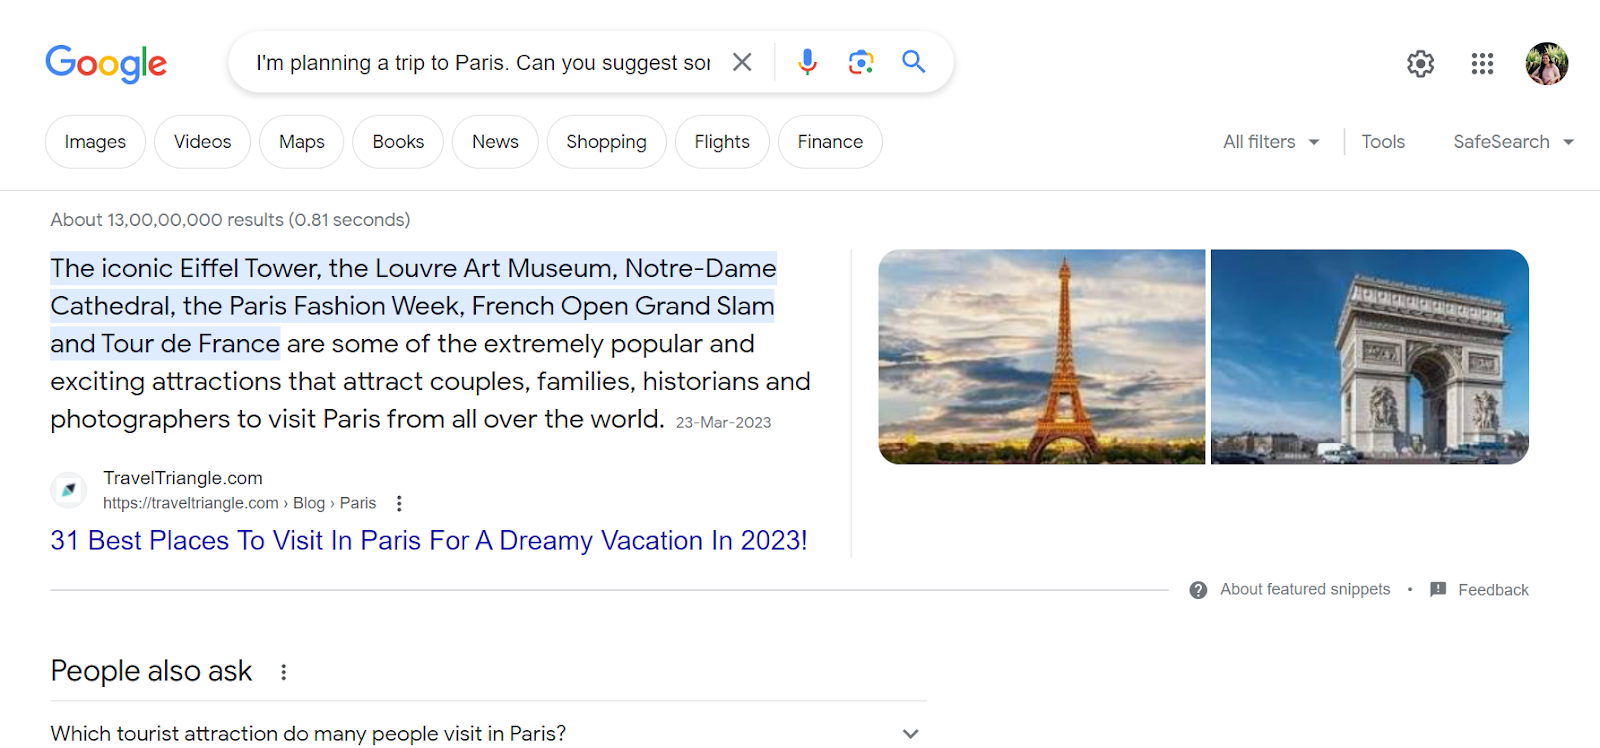 SERP on user query: "I'm planning a trip to Paris. Can you suggest some tourist attractions?"